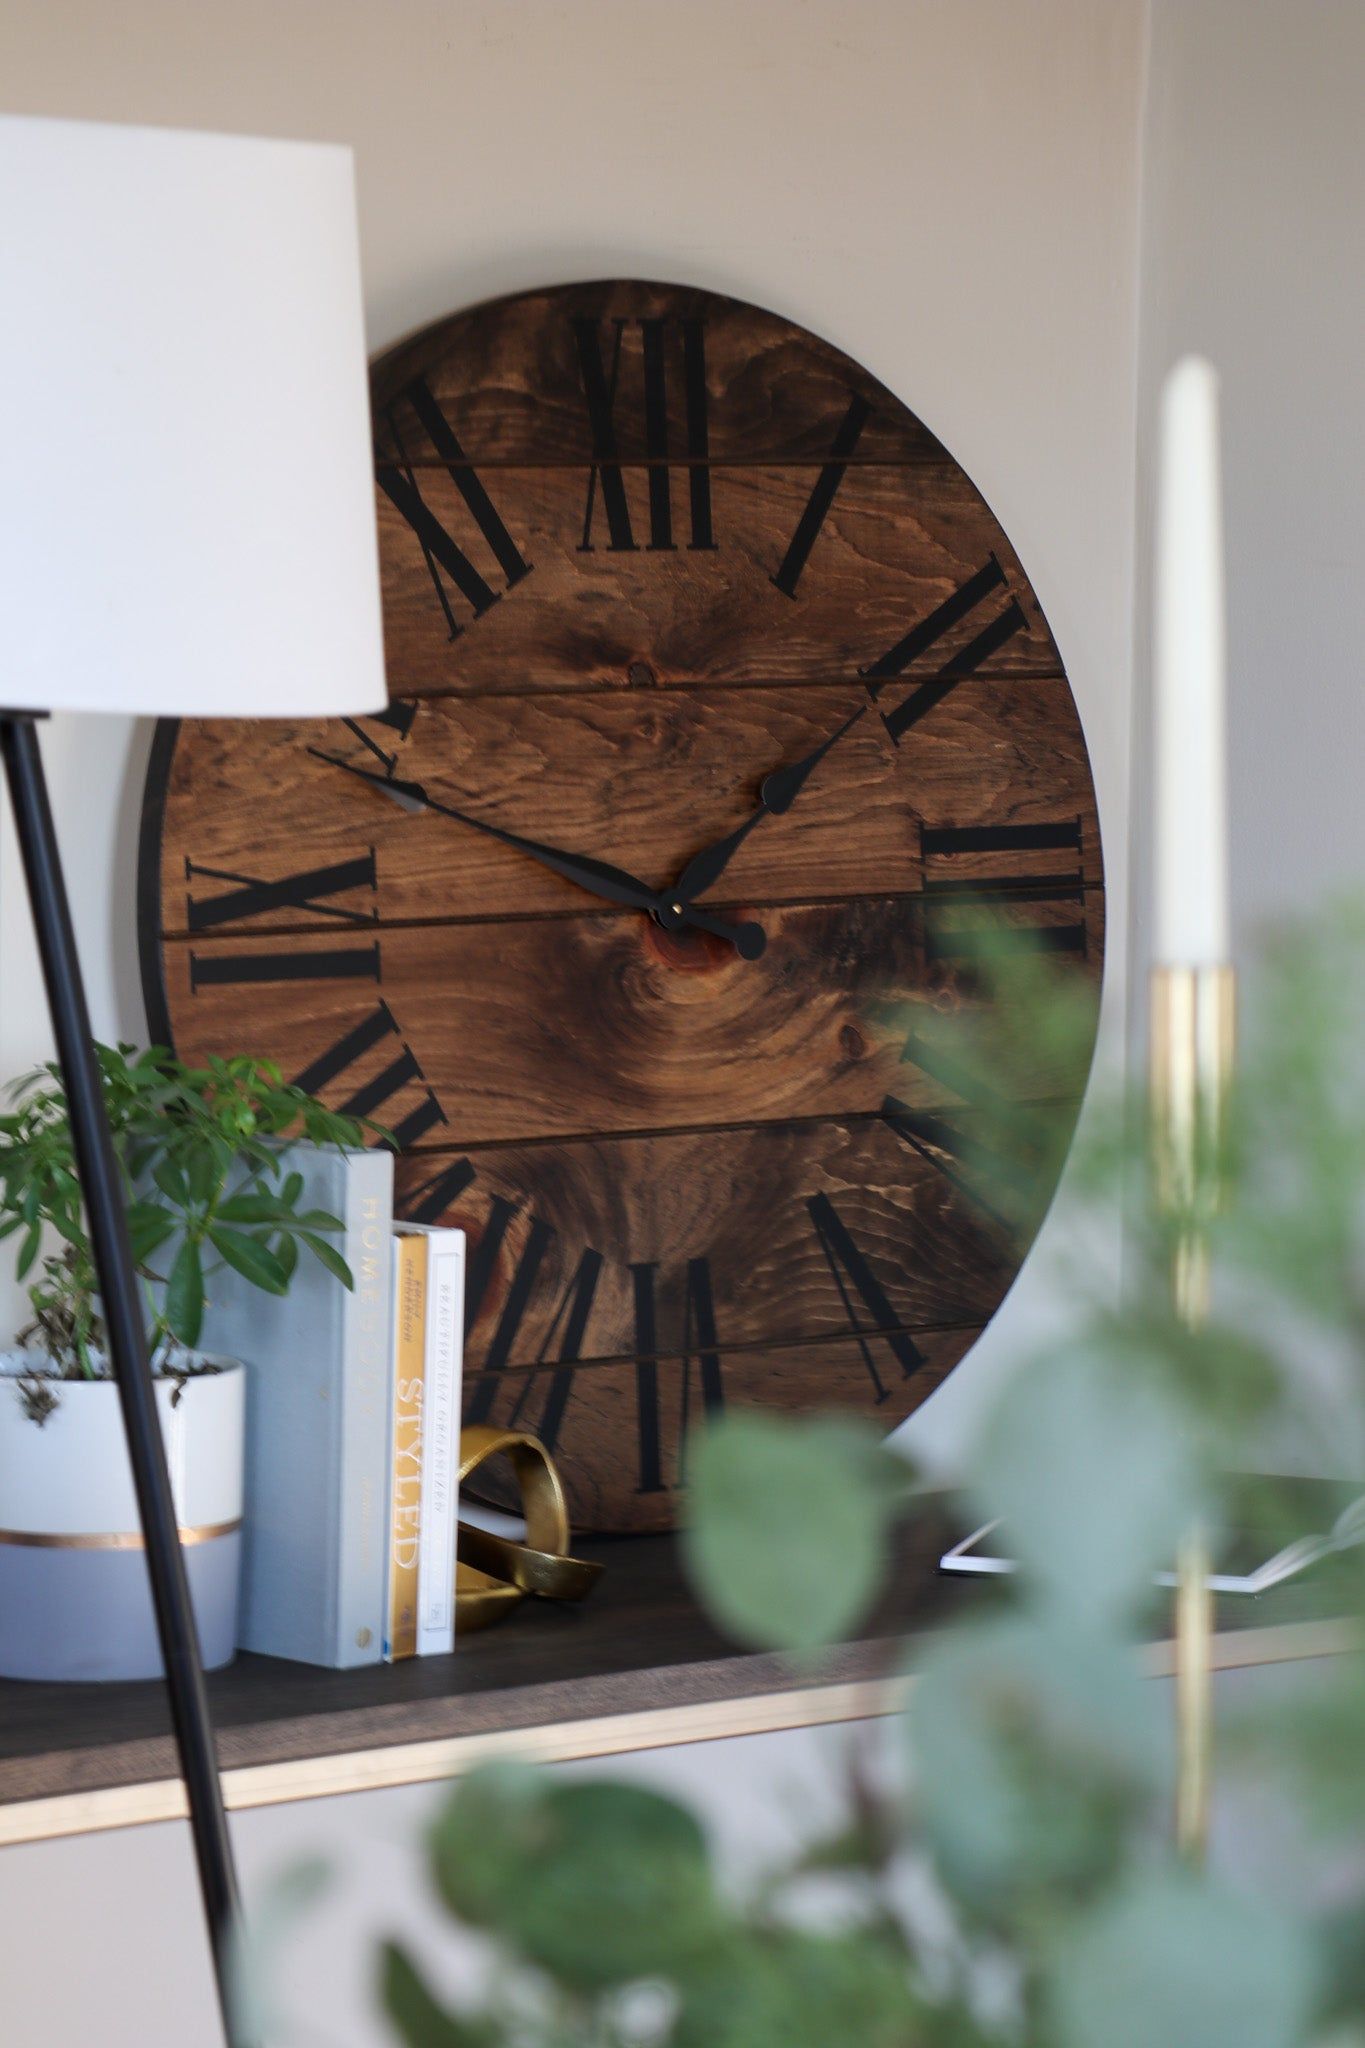 The Beauty of Oversized Wall Clocks for the Kitchen